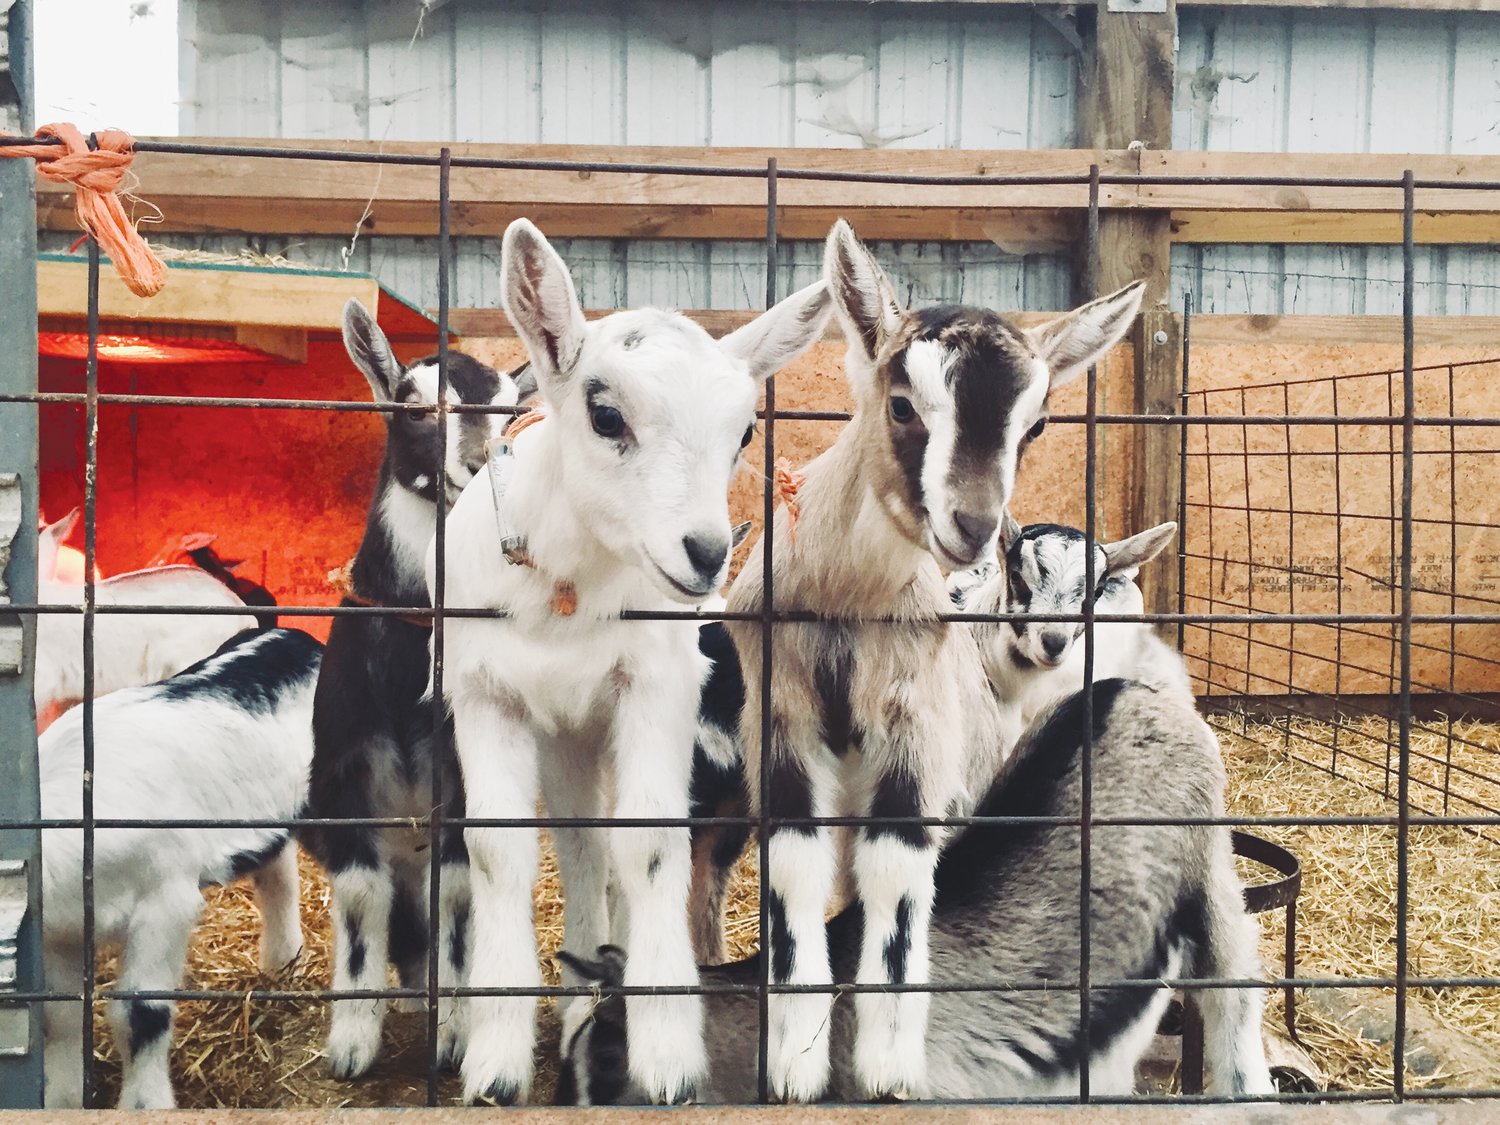 Celebrity Dairy offers baby goat playtime for small groups.